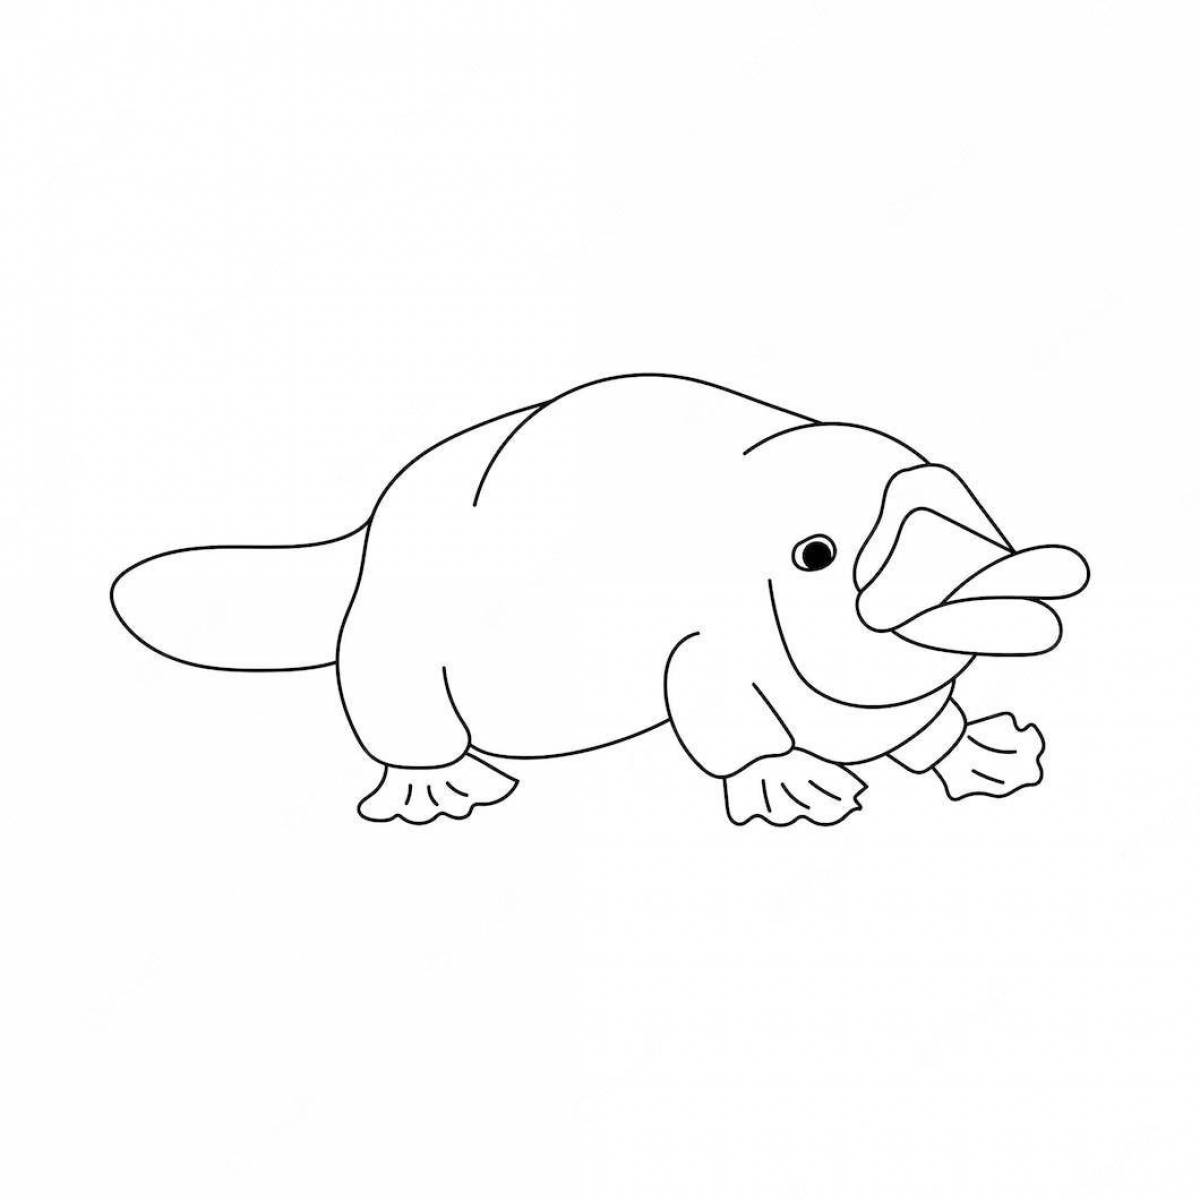 A fun platypus coloring book for kids